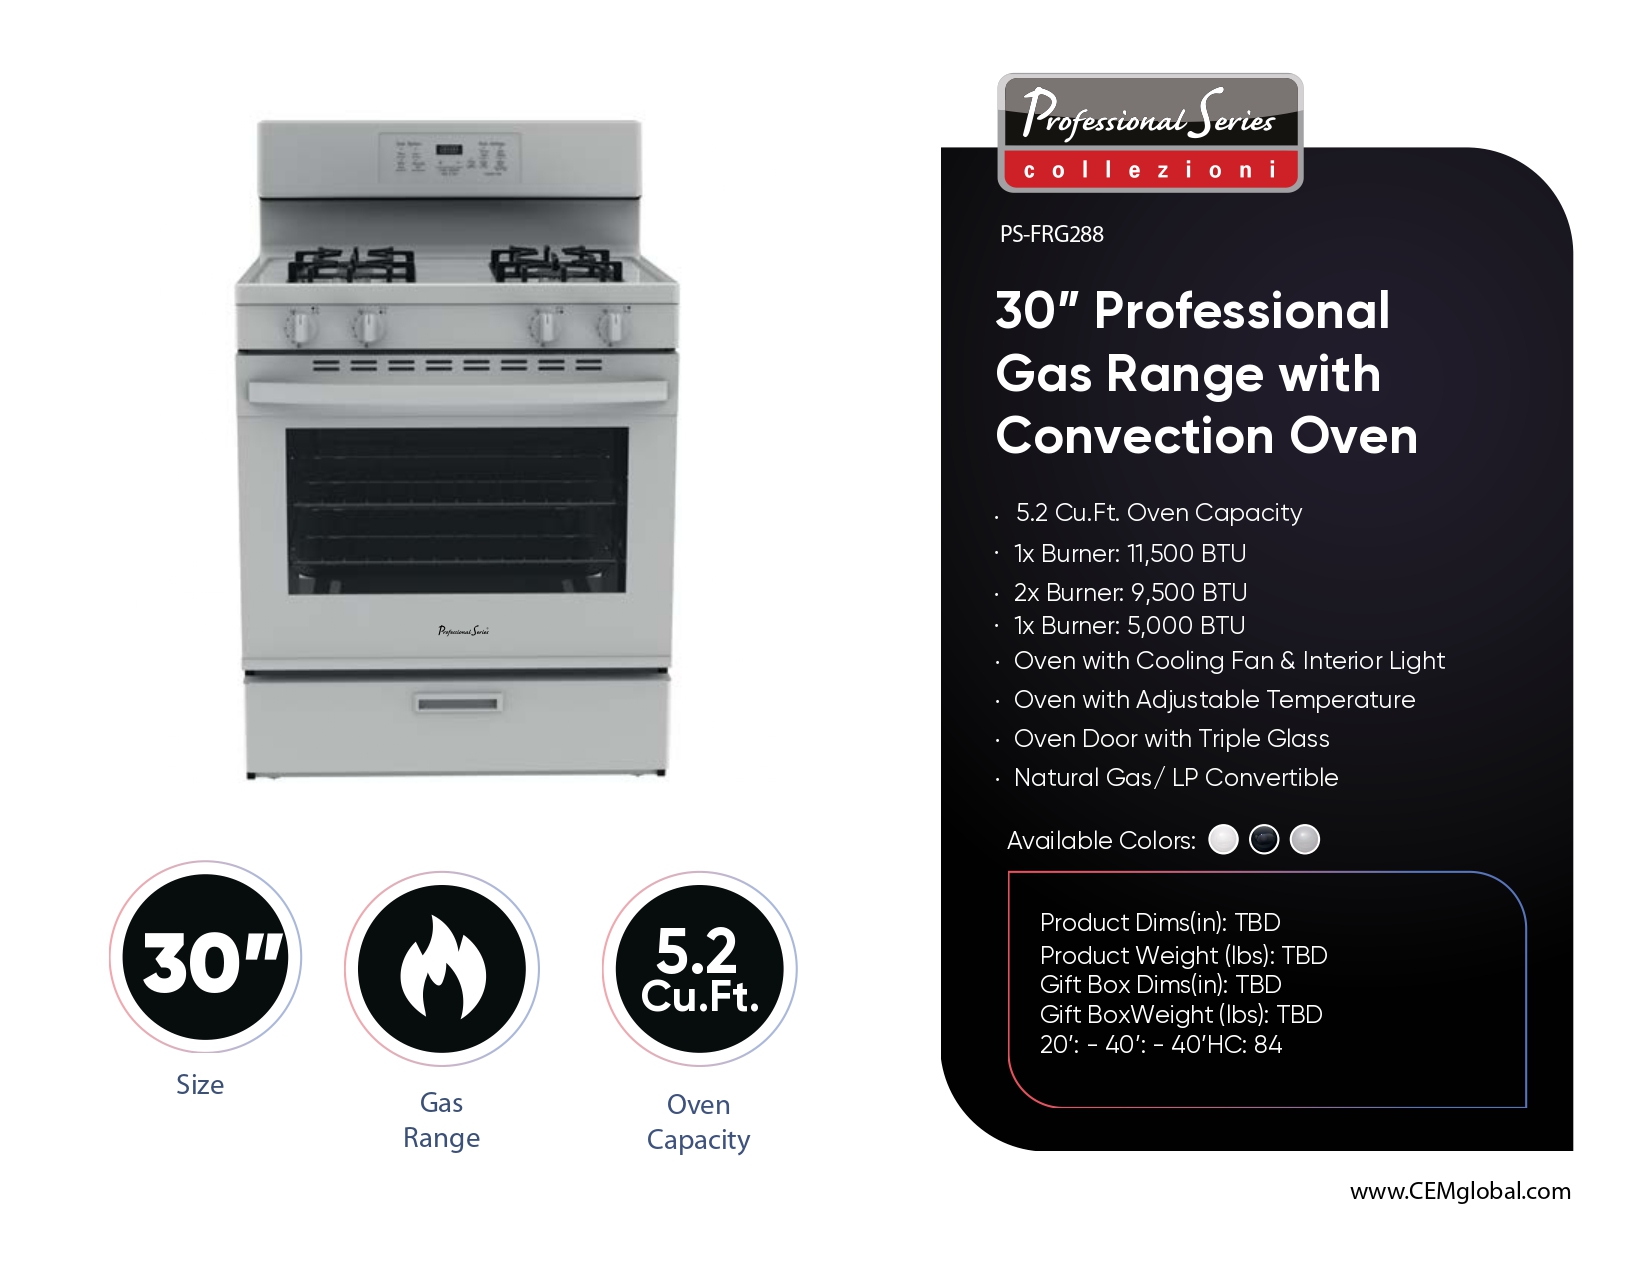 30” Professional Gas Range with Convection Oven